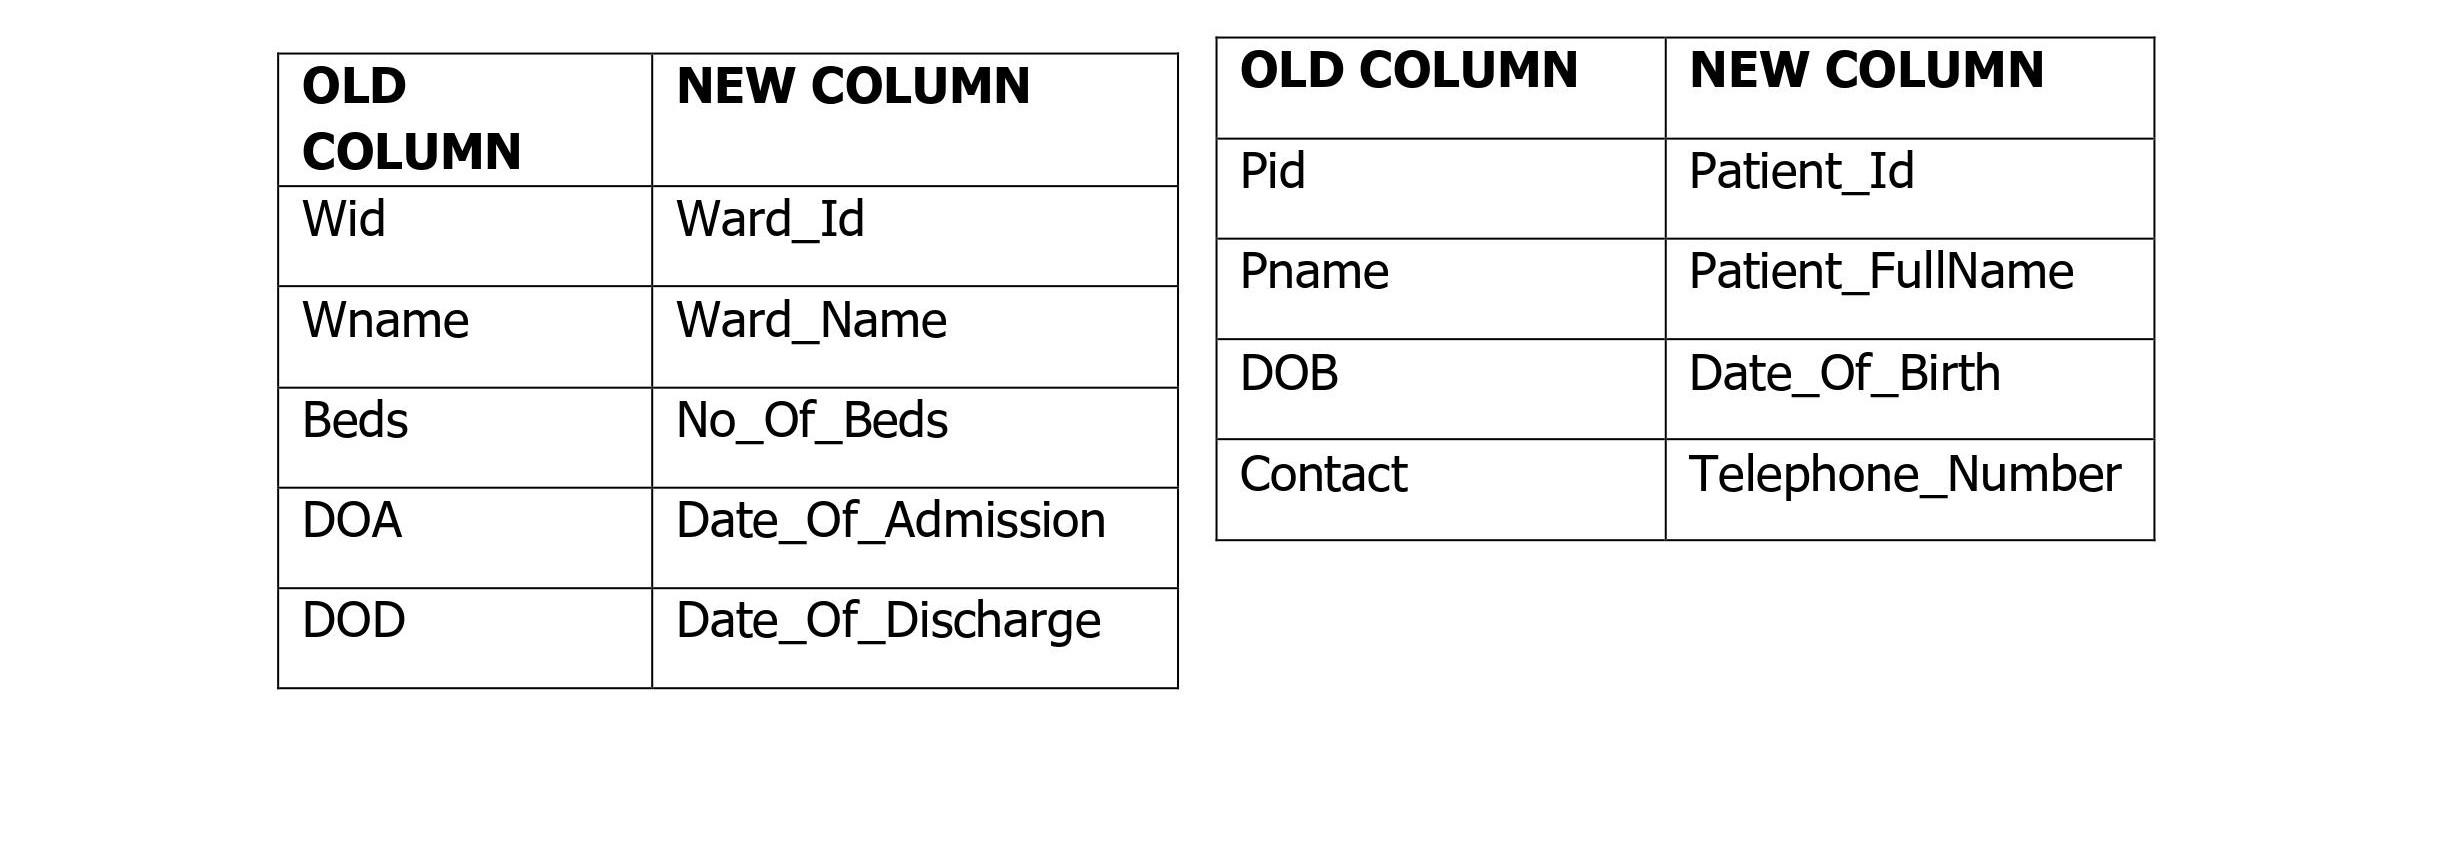 OLD COLUMN Wid Wname Beds DOA DOD NEW COLUMN Ward_Id Ward_Name No_Of_Beds Date_Of_Admission Date_Of_Discharge